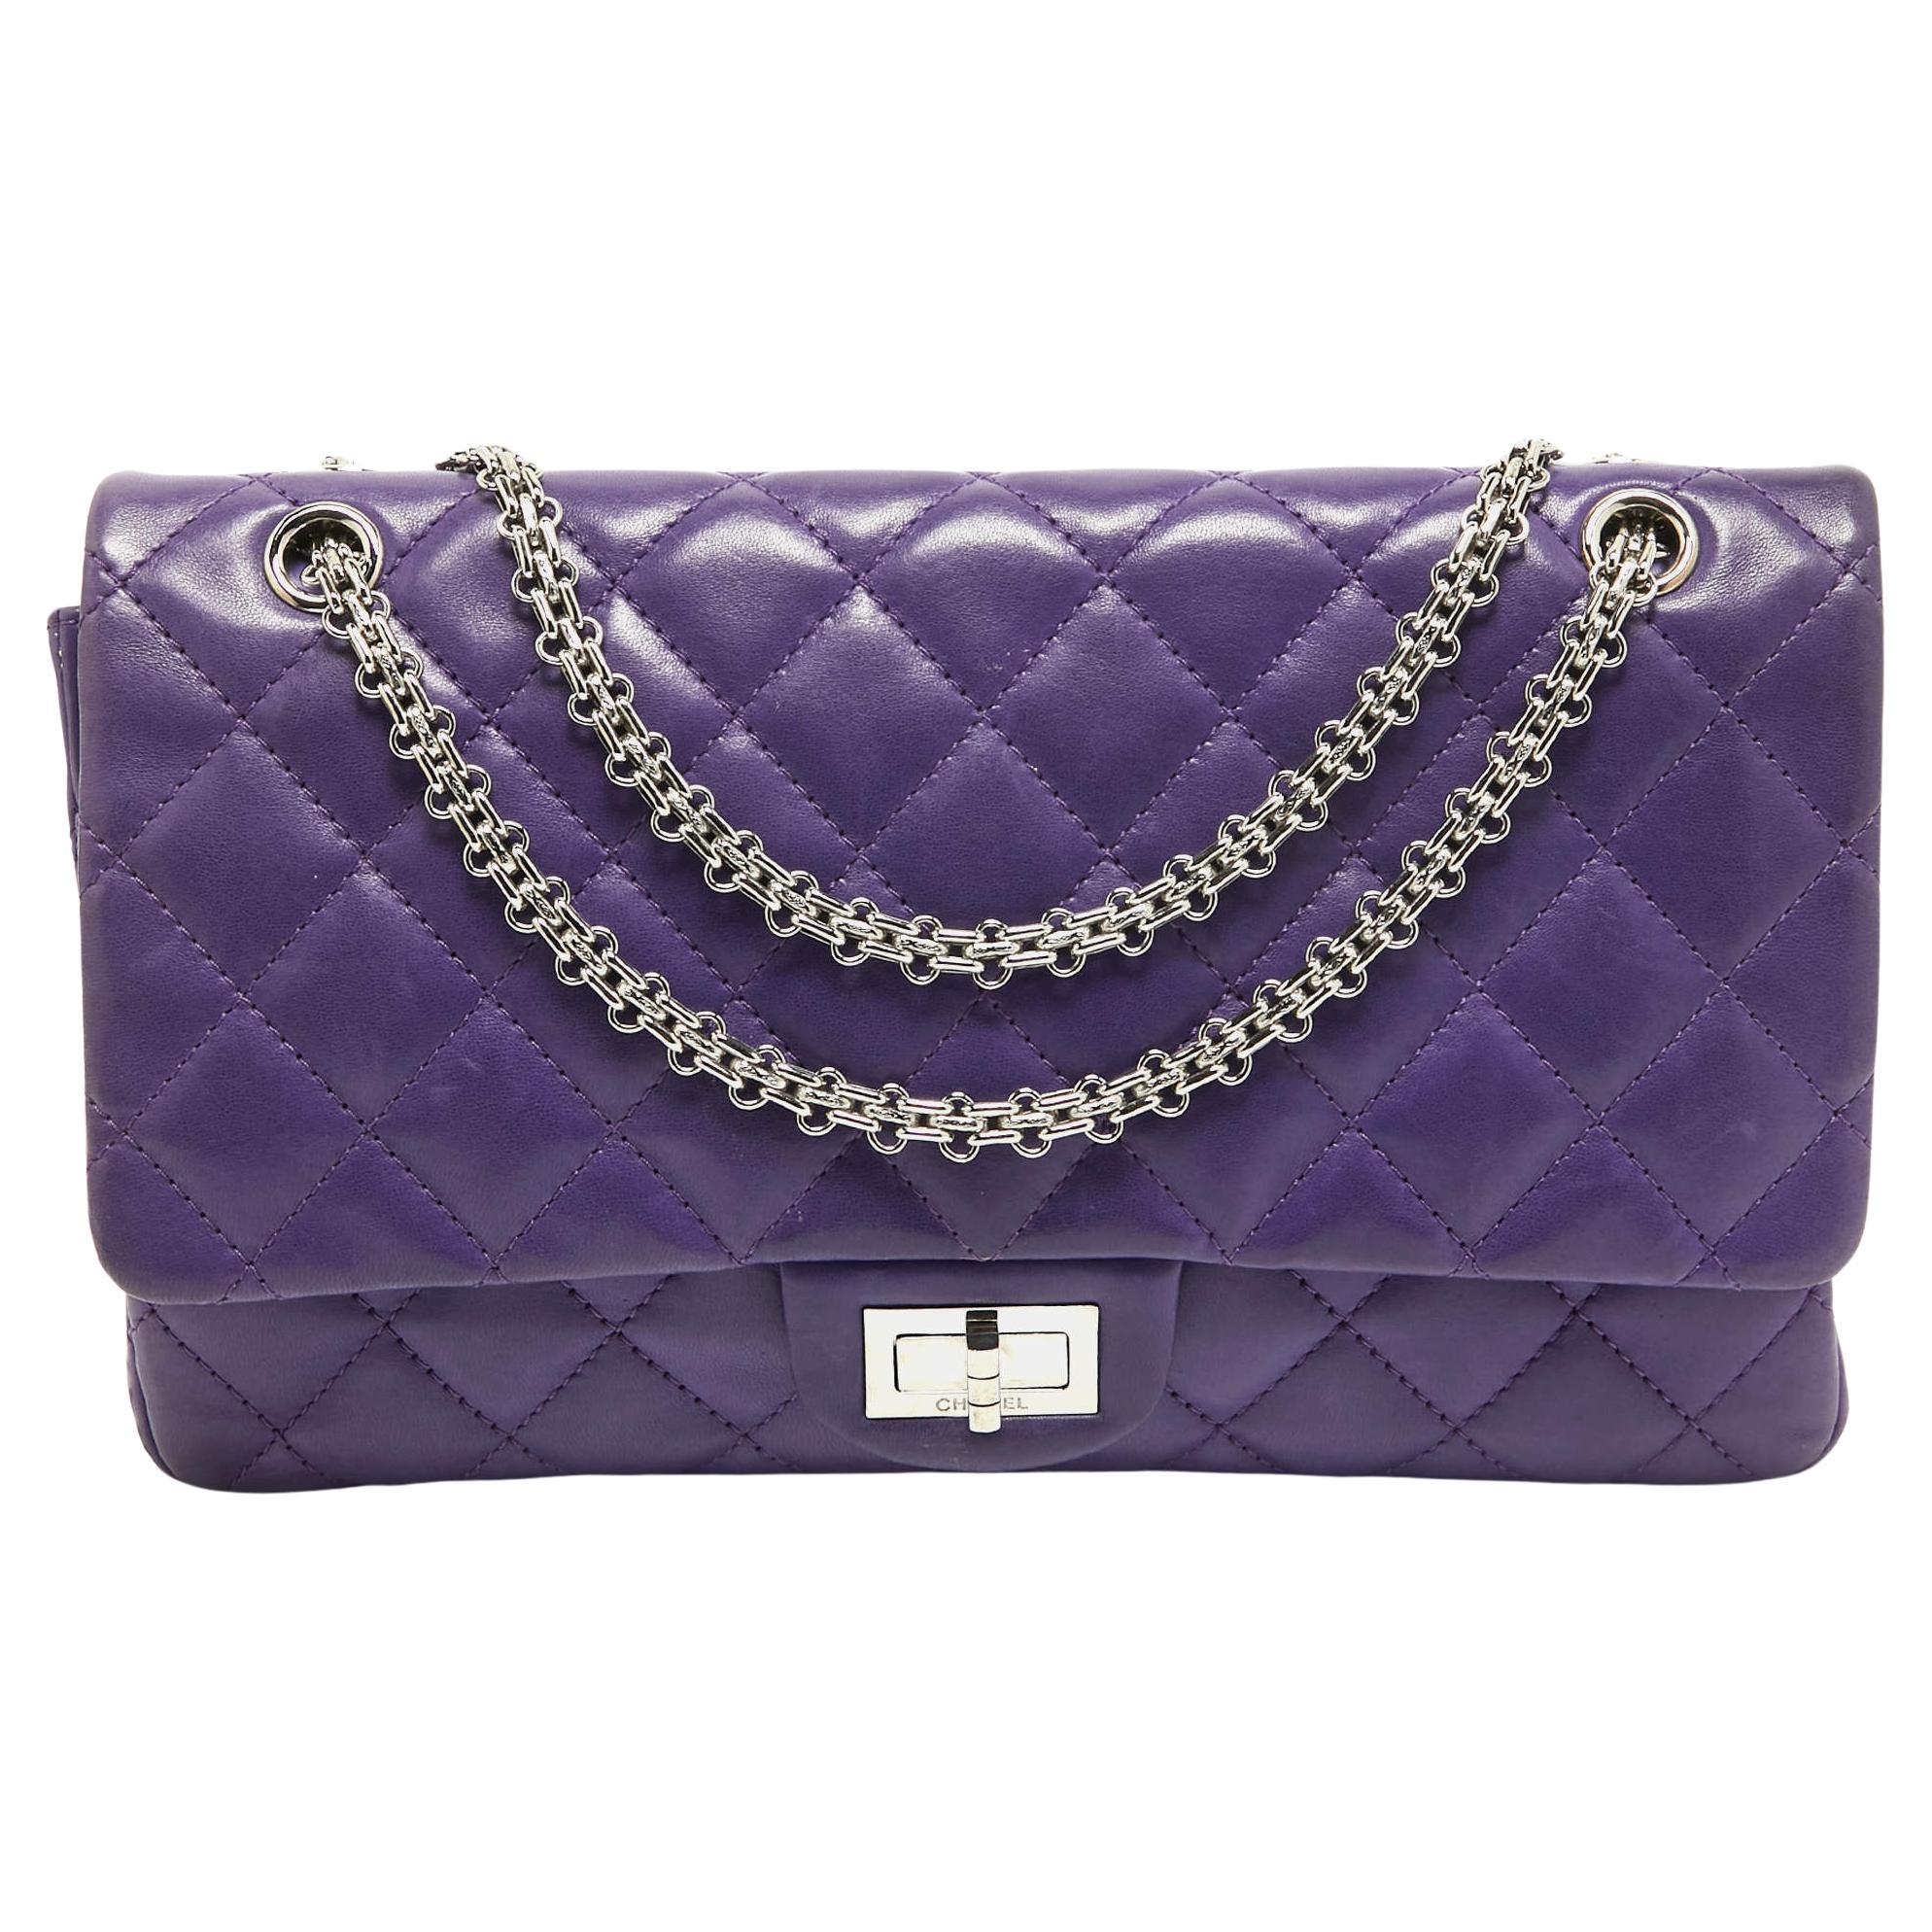 Chanel Purple Quilted Leather 227 Reissue 2.55 Flap Bag For Sale